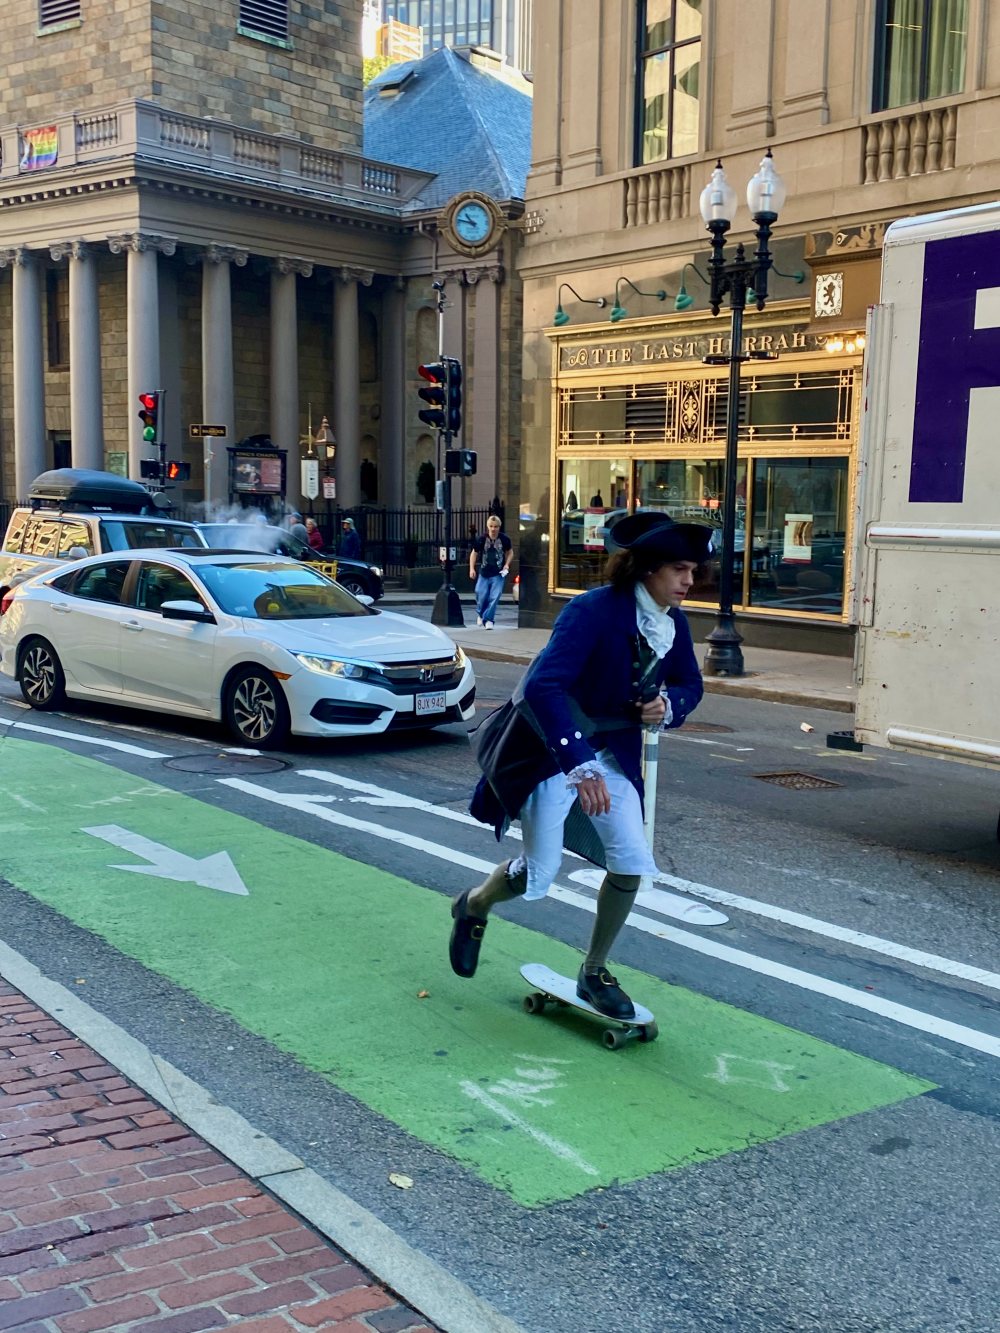 Man skateboarding in Boston in a traditional historic outfit